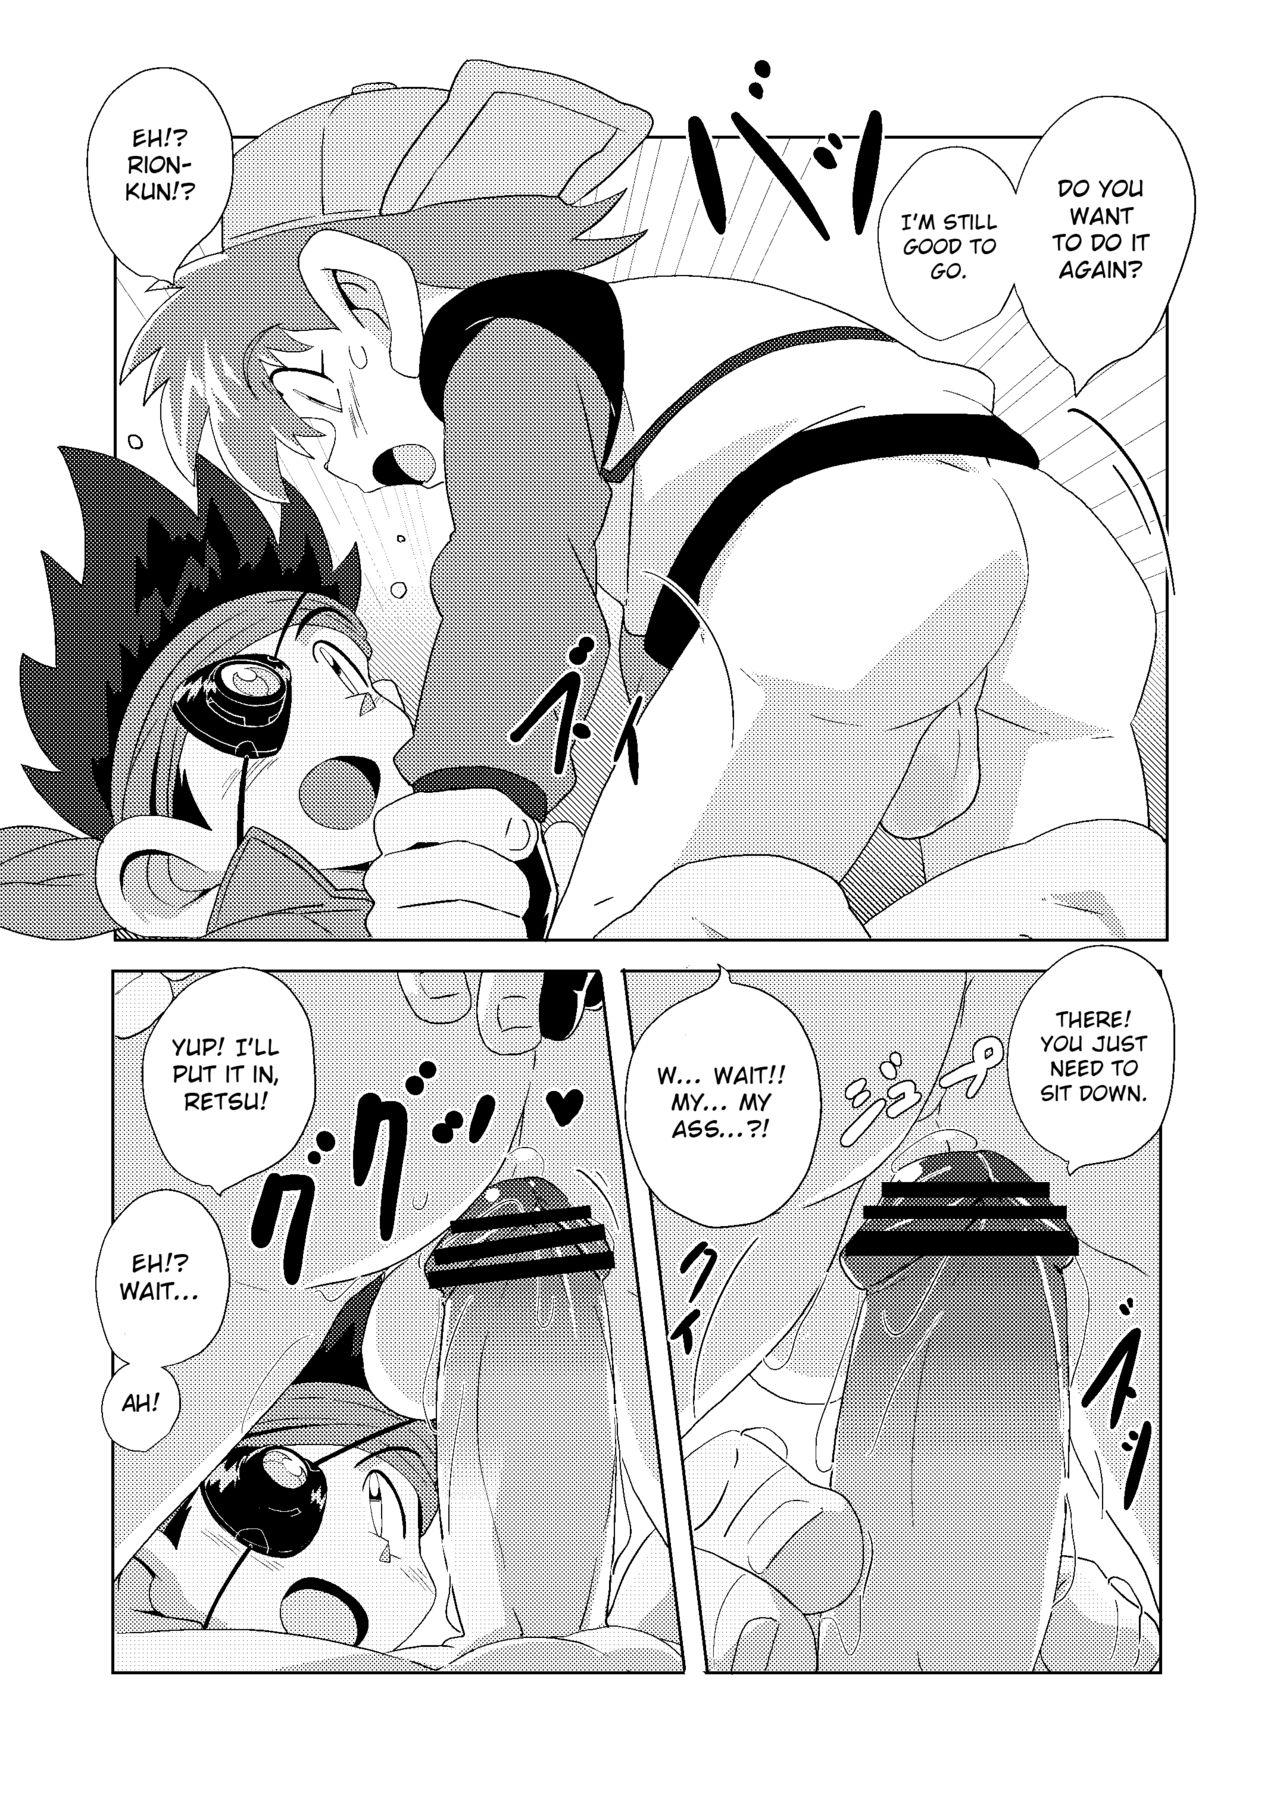 Amateurs Gone Chase the Wind - Bakusou kyoudai lets and go Spooning - Page 10